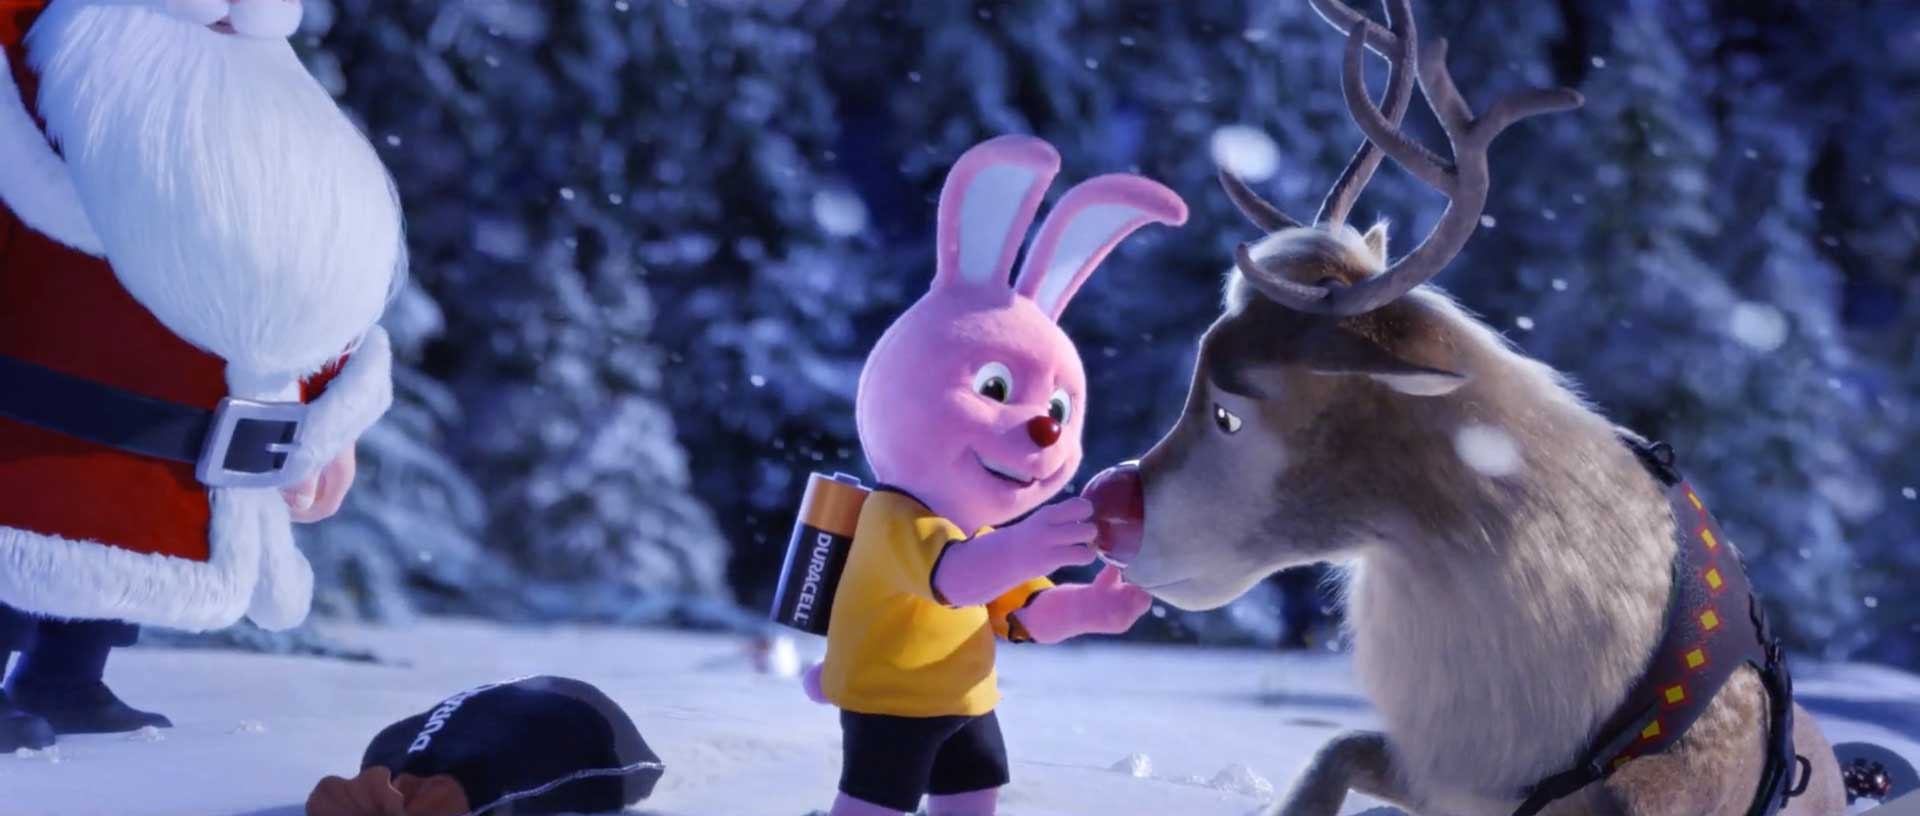 MPC The Mill Paris and the Duracell Bunny Save Christmas | STASH MAGAZINE